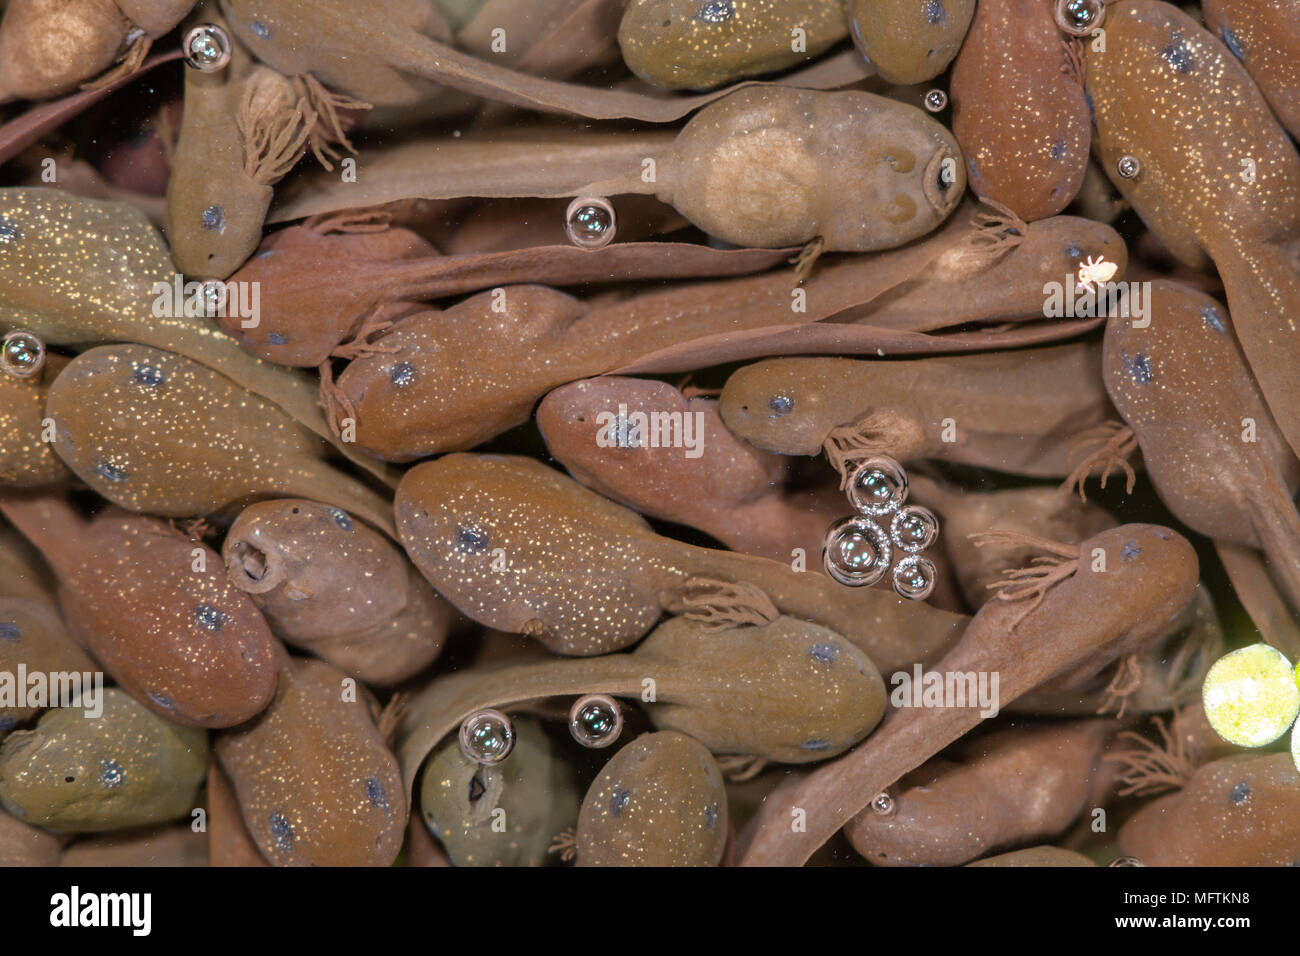 Mass of tadpoles of common frog (Rana temporaria). Small tadpoles shortly after hatching at surface of pond, in the family Ranidae Stock Photo